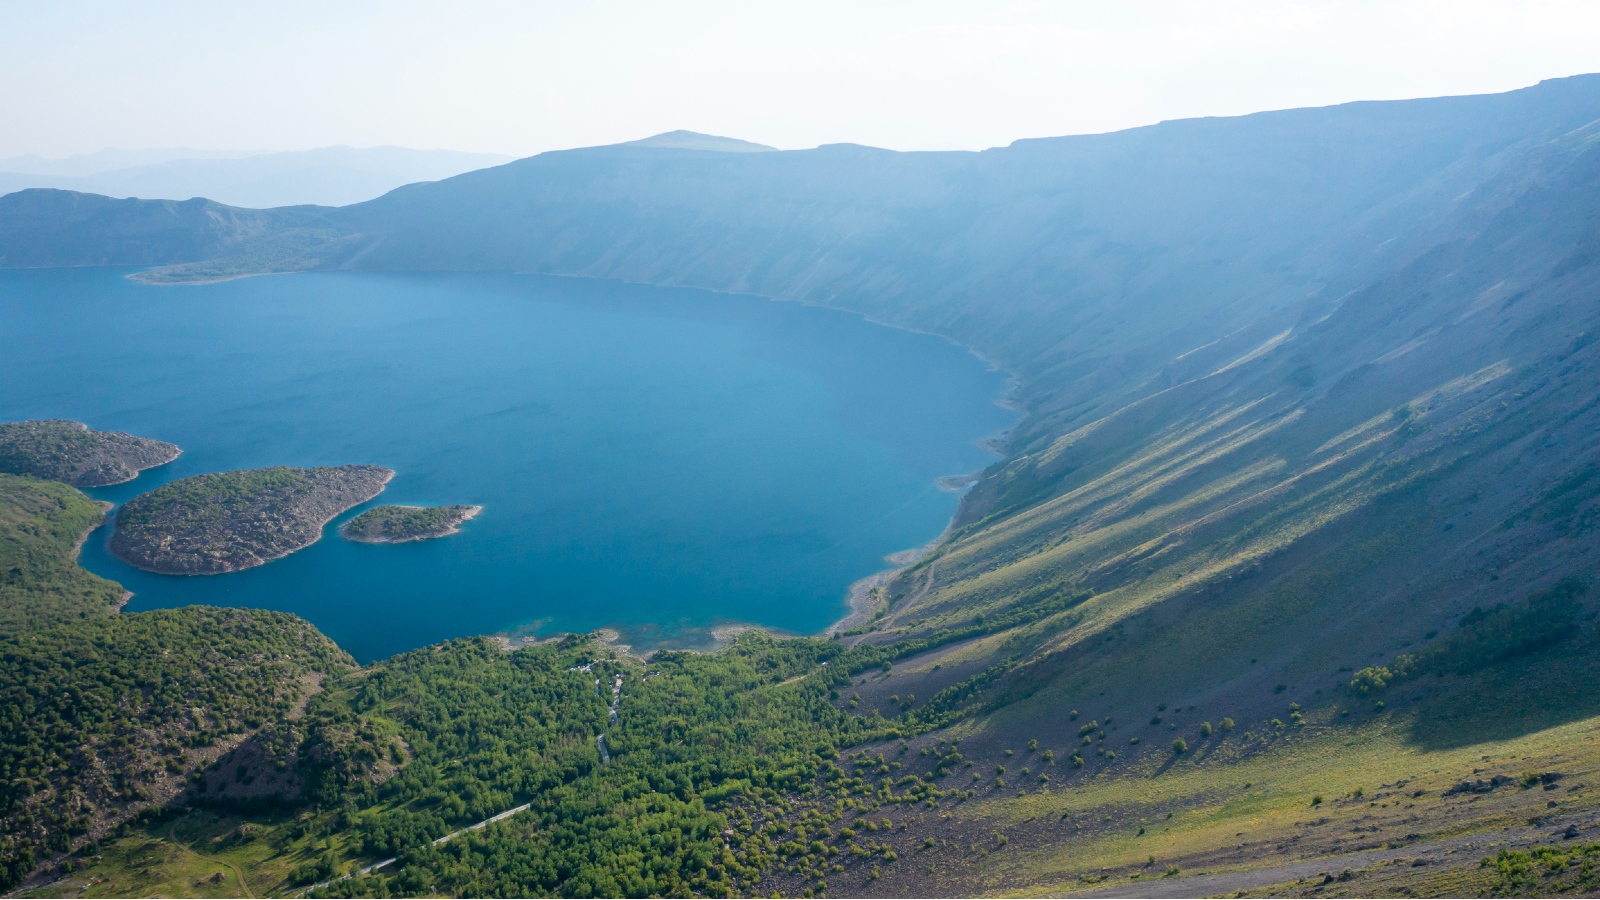 A photo of the crater and lake without snow taken from the top of the caldera